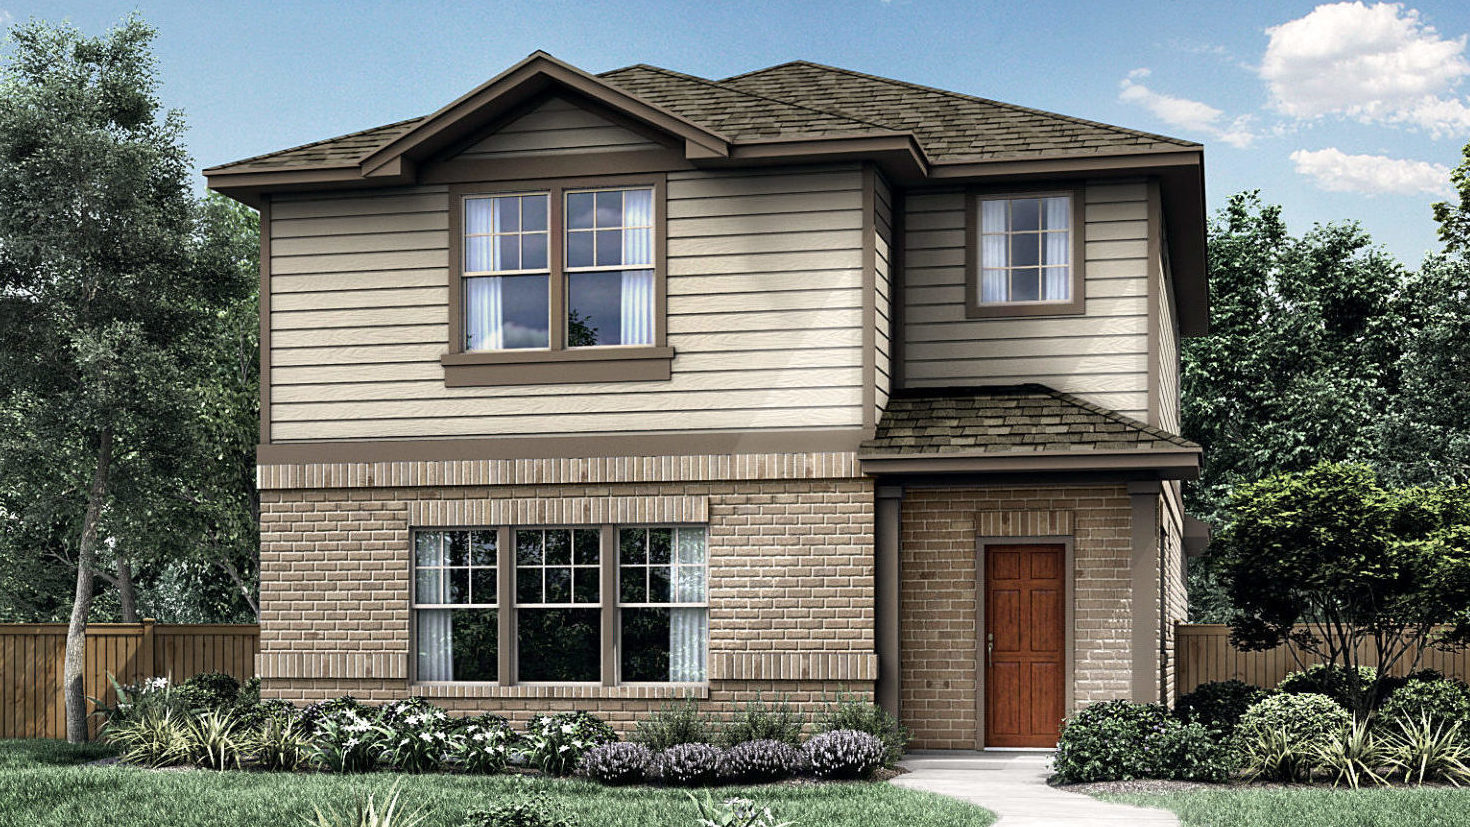 The Franklin Elevation A With Masonry Whisper Valley New Homes in Manor